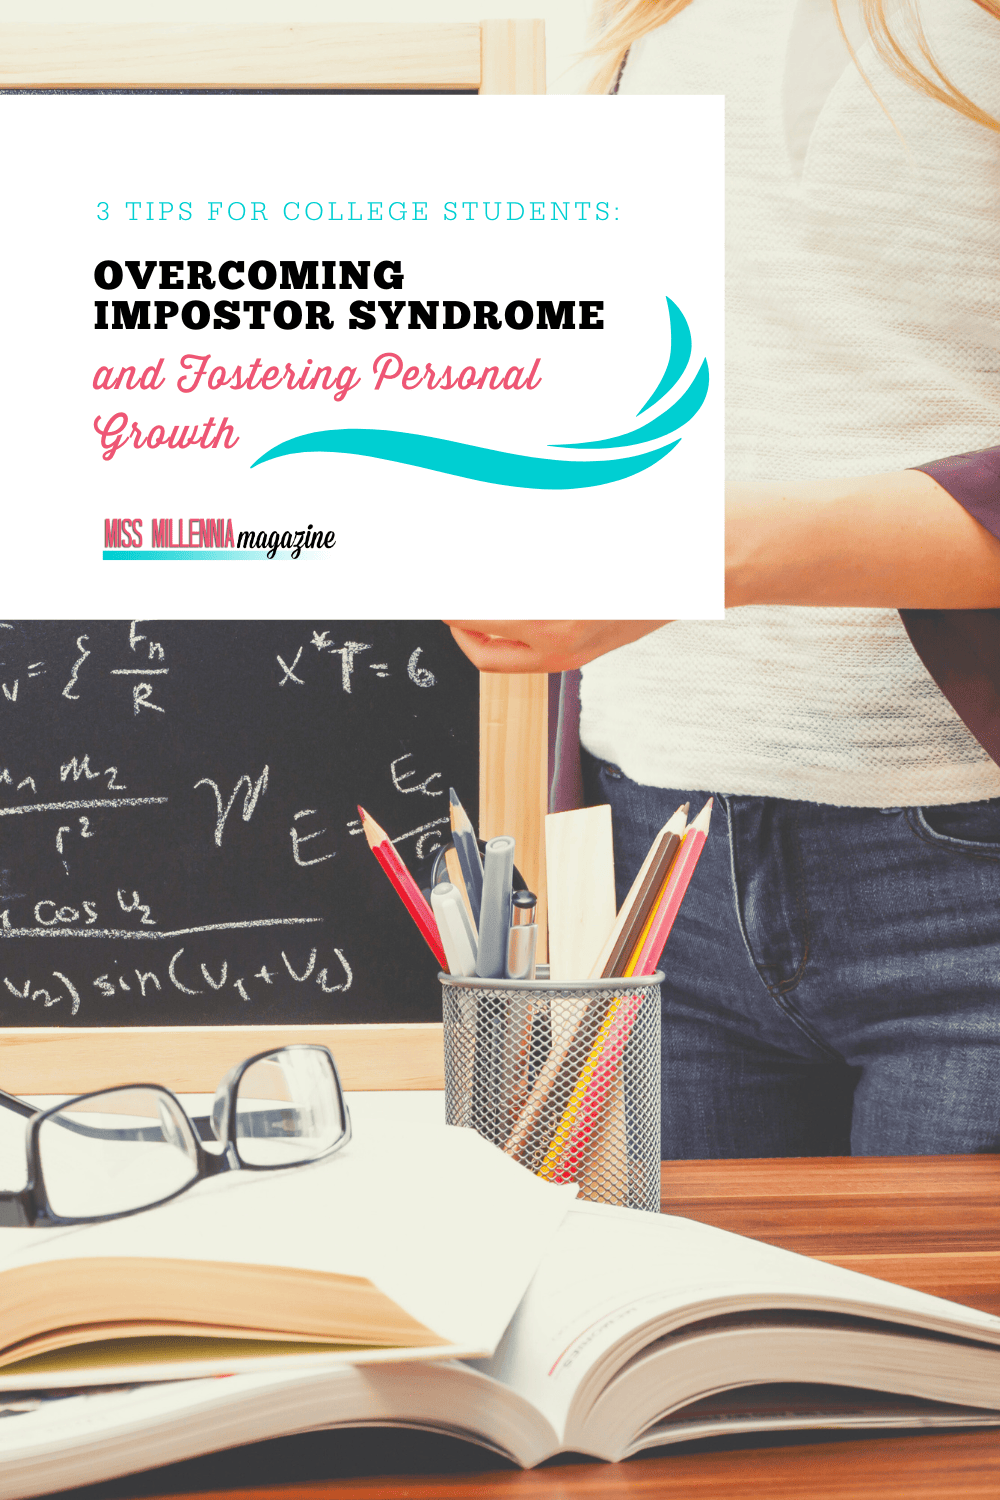 3 Tips for College Students: Overcoming Impostor Syndrome and Fostering Personal Growth